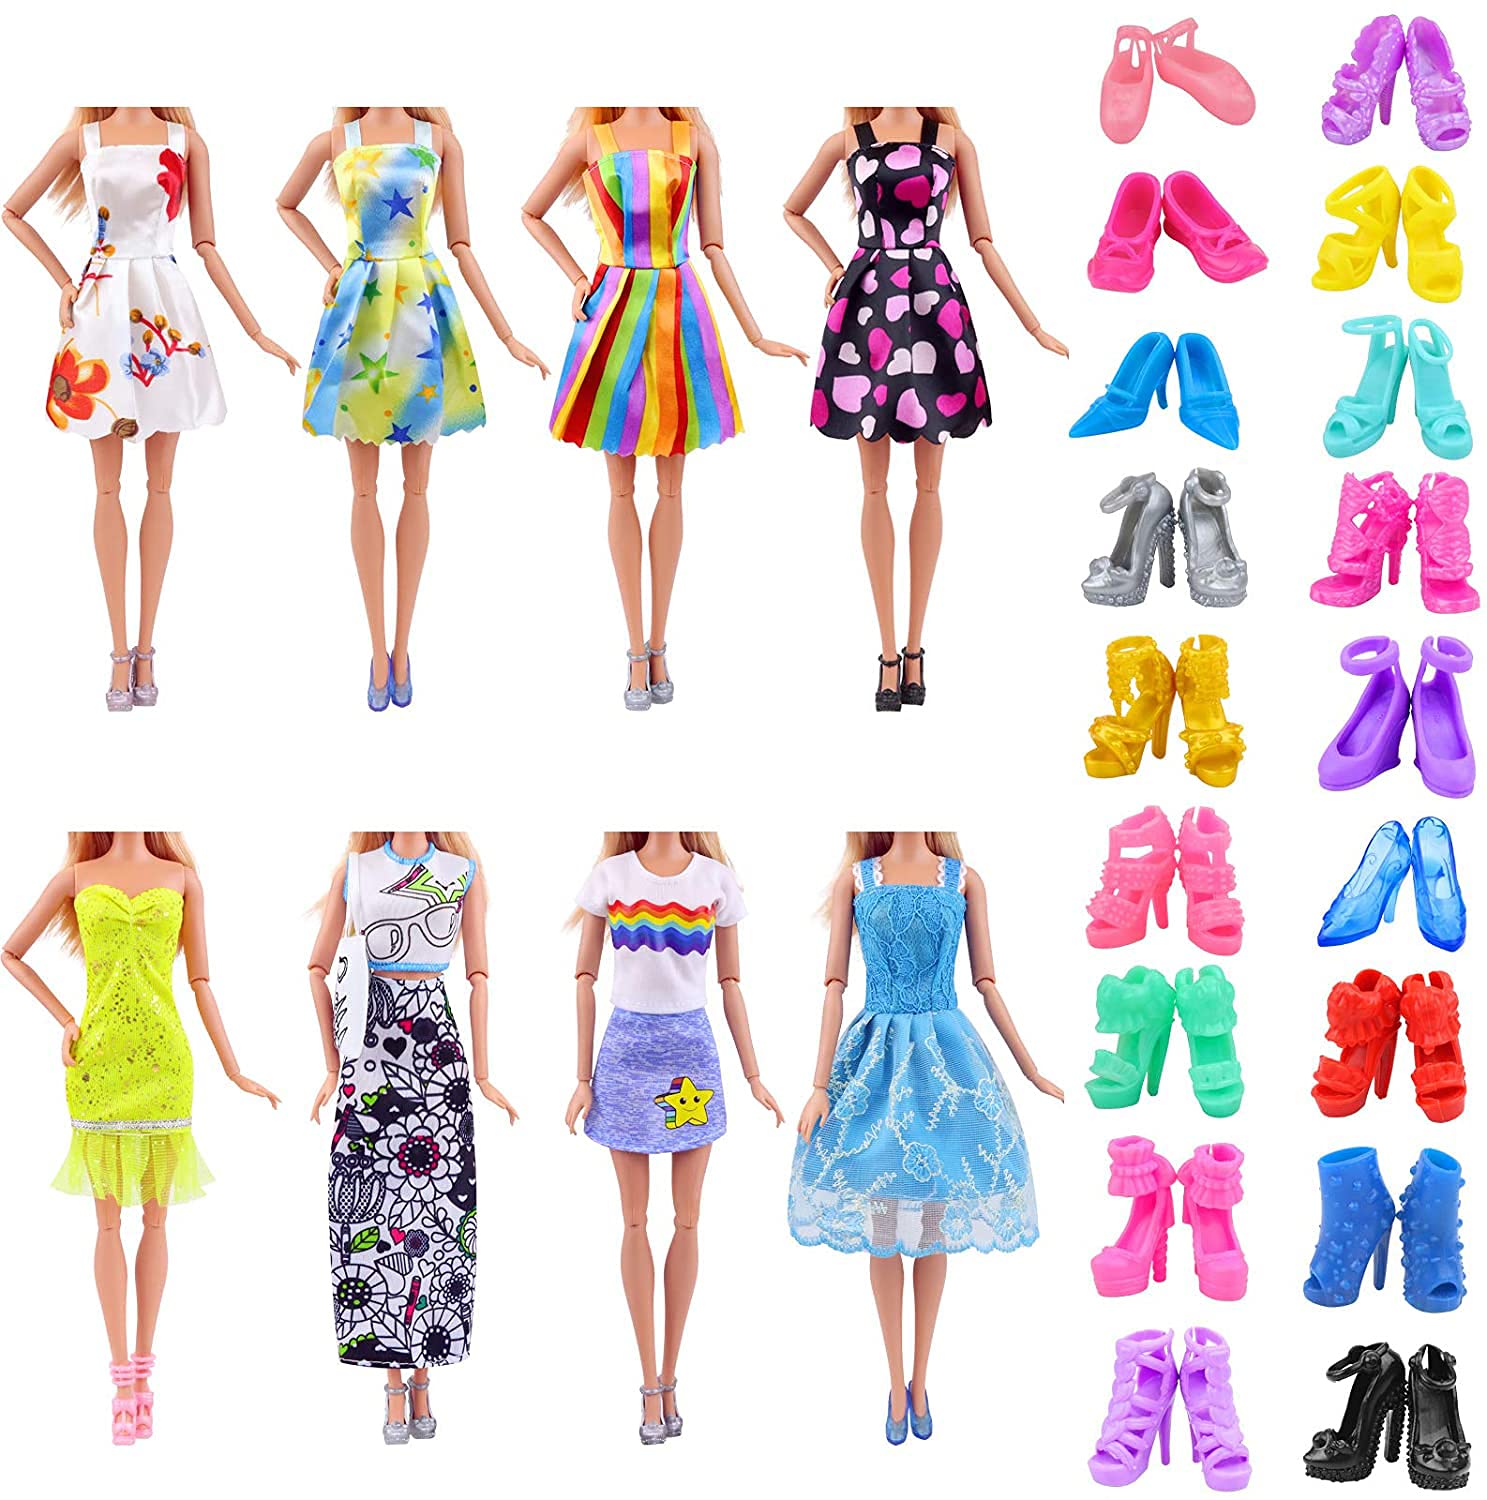 Ecore Fun 30 PCS Doll Clothes and Accessories 5 Fashion Clothes Sets 5 Fashion Skirts 10 Mini Dresses 10 Shoes Fashion Casual Outfits Set Perfect for 11.5 inch Dolls